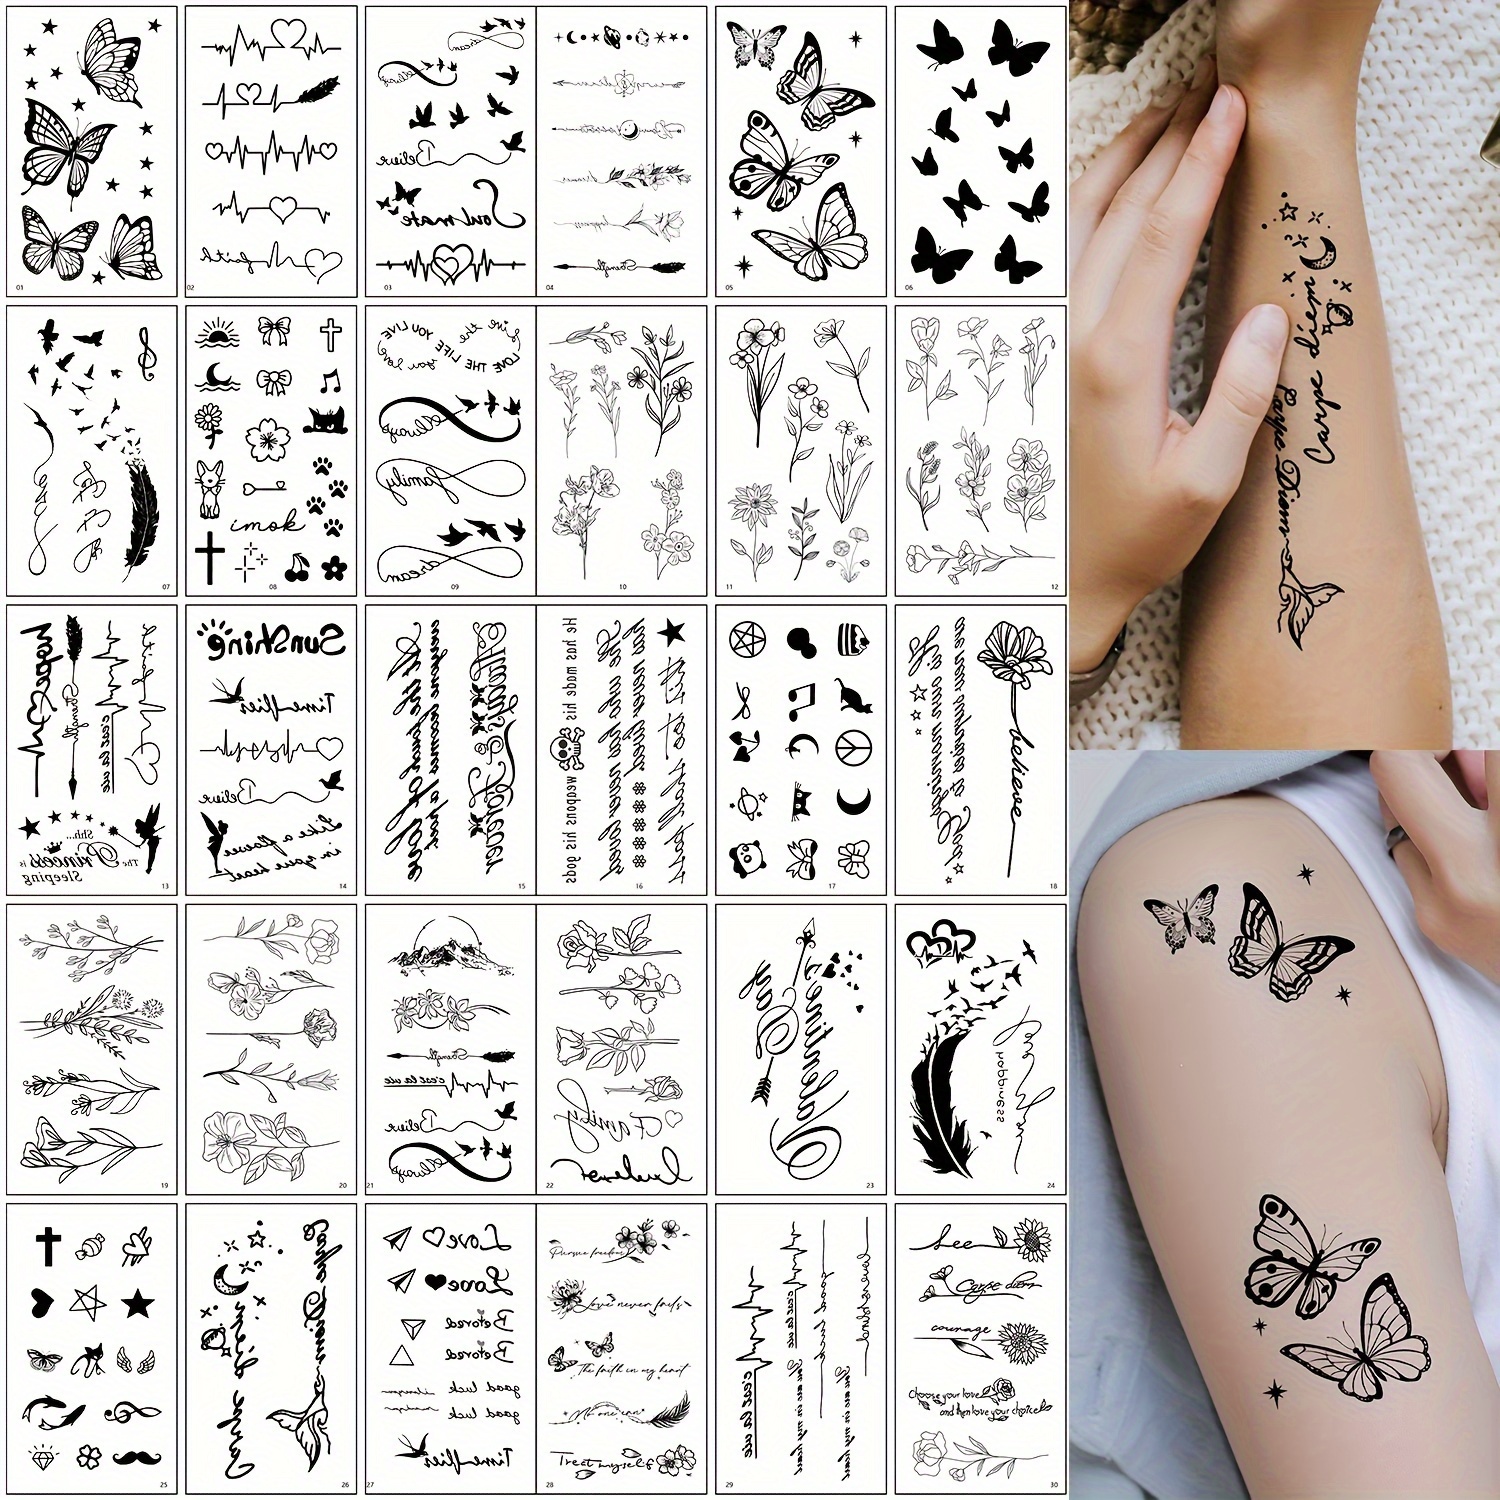 

30 Sheets Temporary Tattoos Stickers, Black Love Heart Ecg Butterfly Florals Feathers Stars Quotes Design, Waterproof Fake Tattoo Decals For Women, For Fingers, Wrist, Collarbone - Party Makeup Art